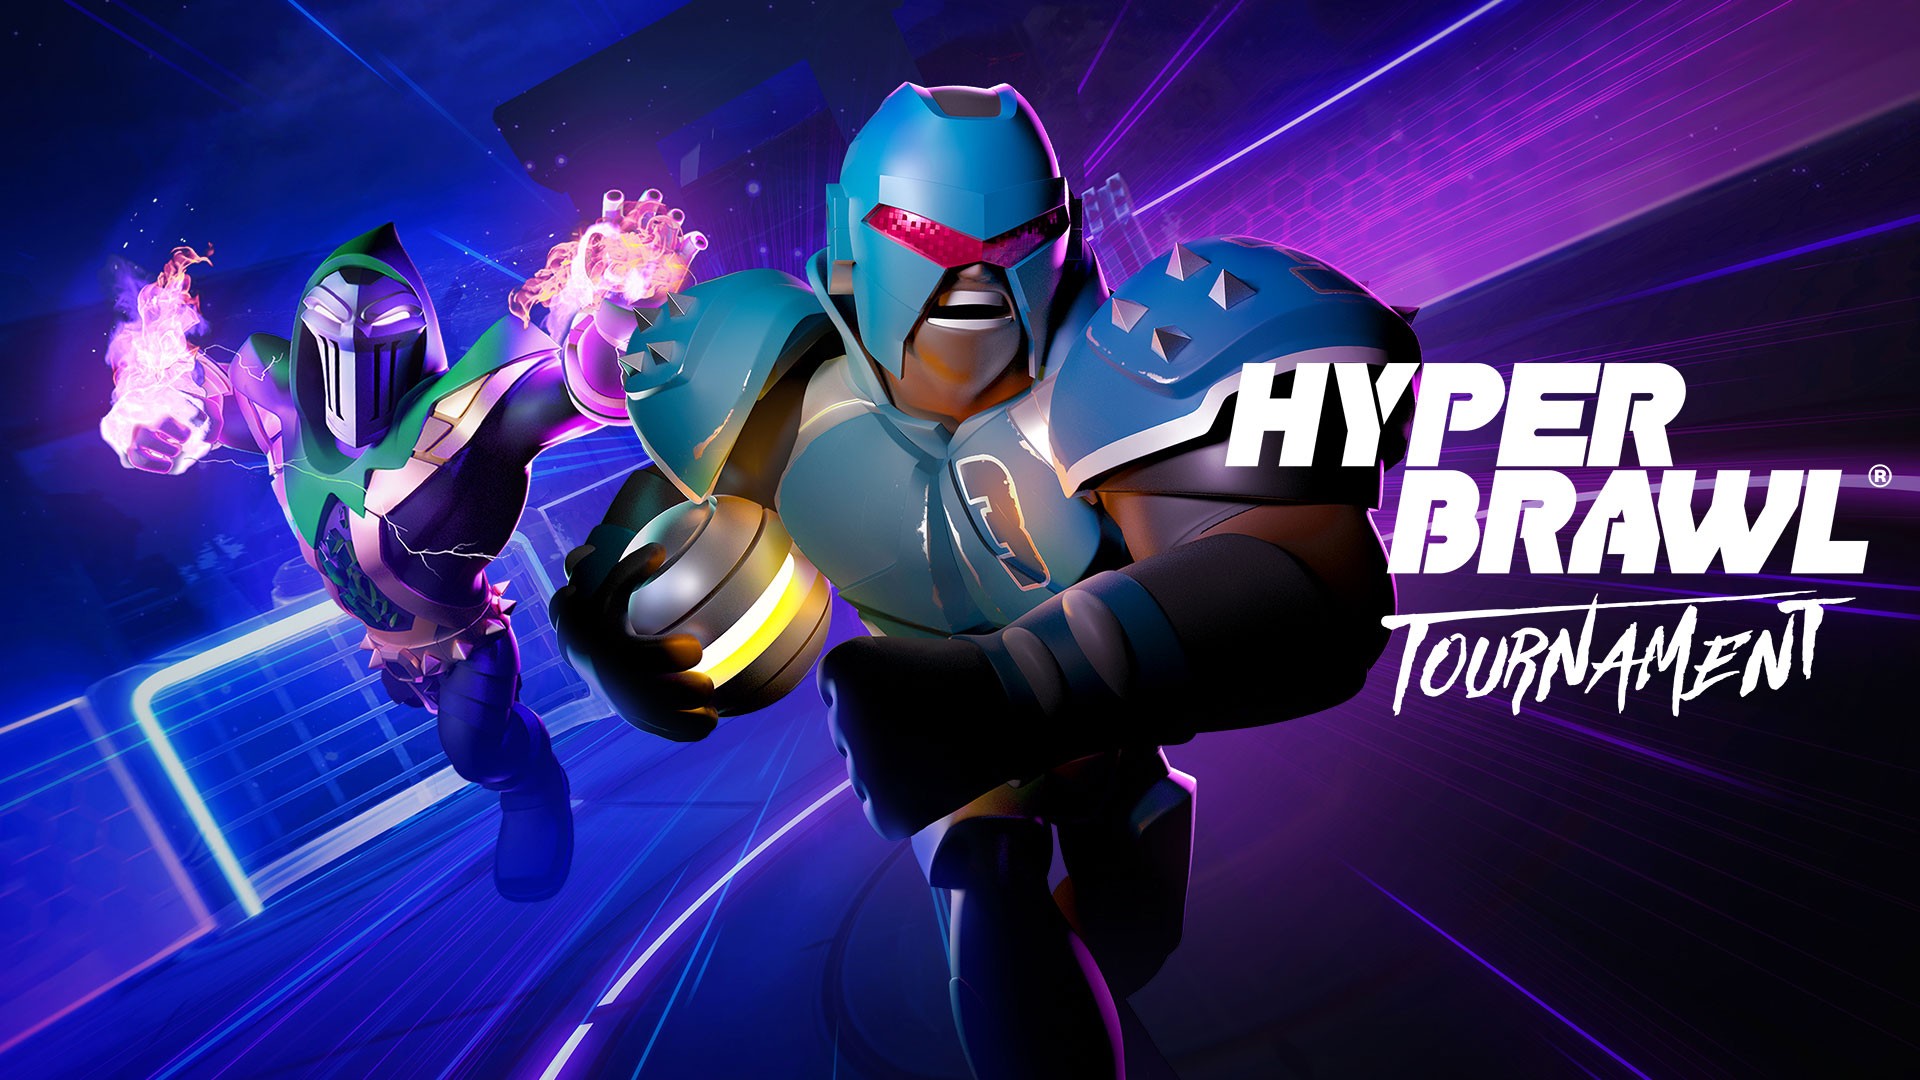 HyperBrawl Tournament: The Multiplayer Sports-Brawler Launches October 20 on Xbox One